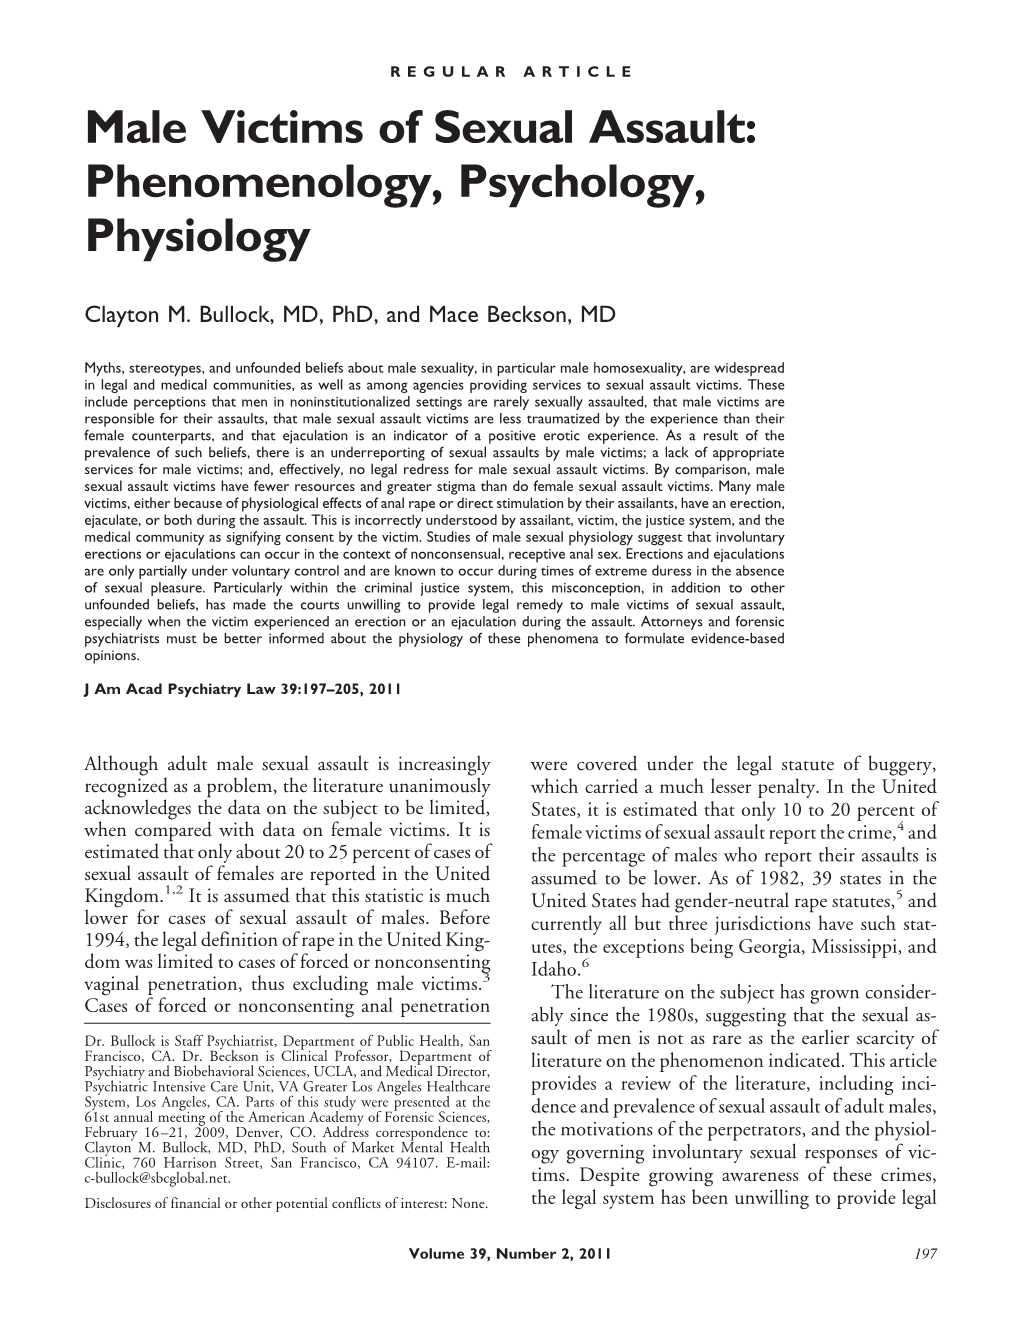 Male Victims of Sexual Assault: Phenomenology, Psychology, Physiology